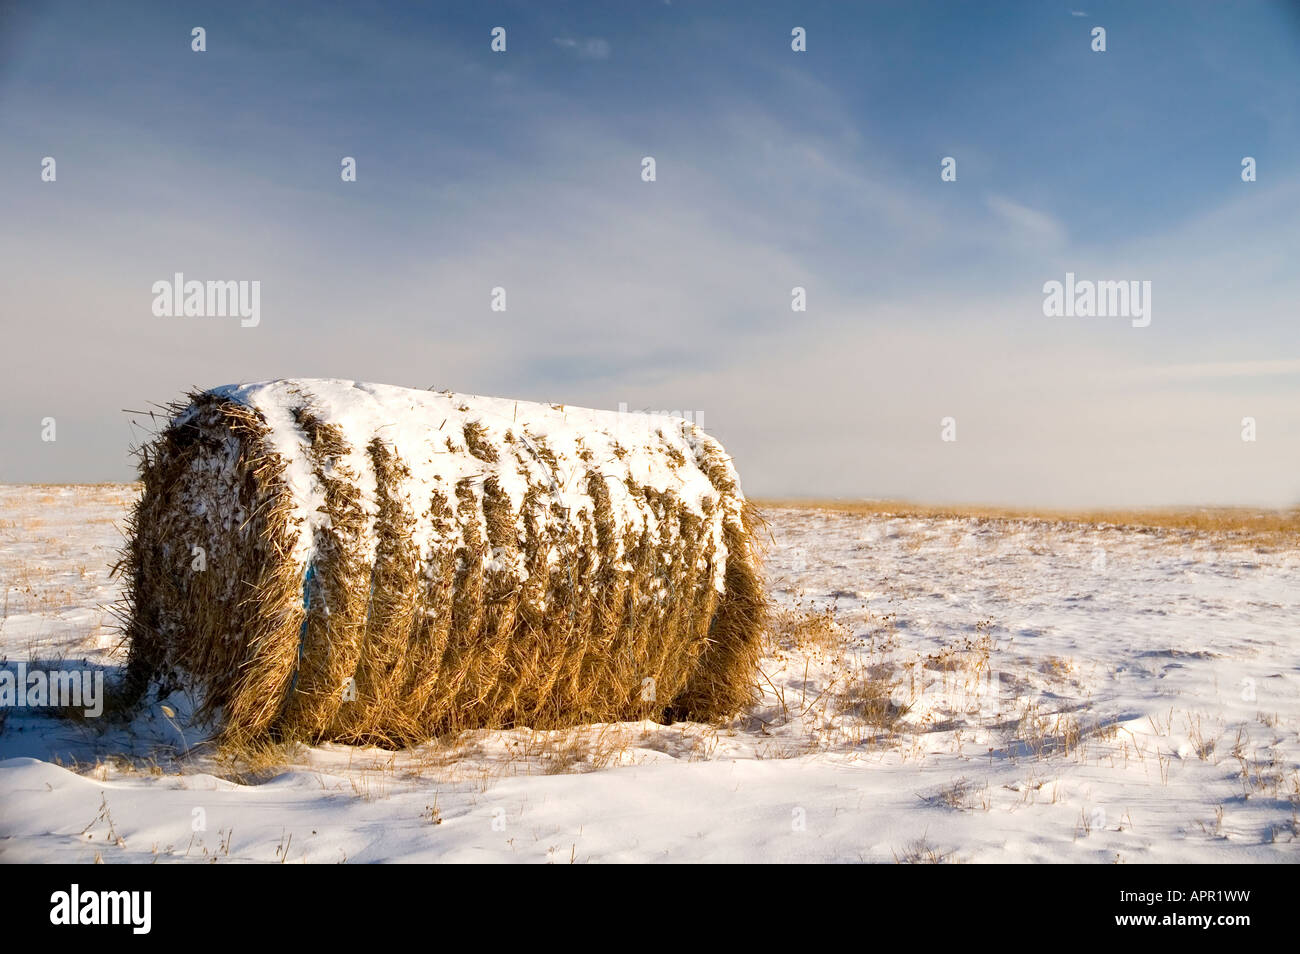 Hay bale in snow field Stock Photo